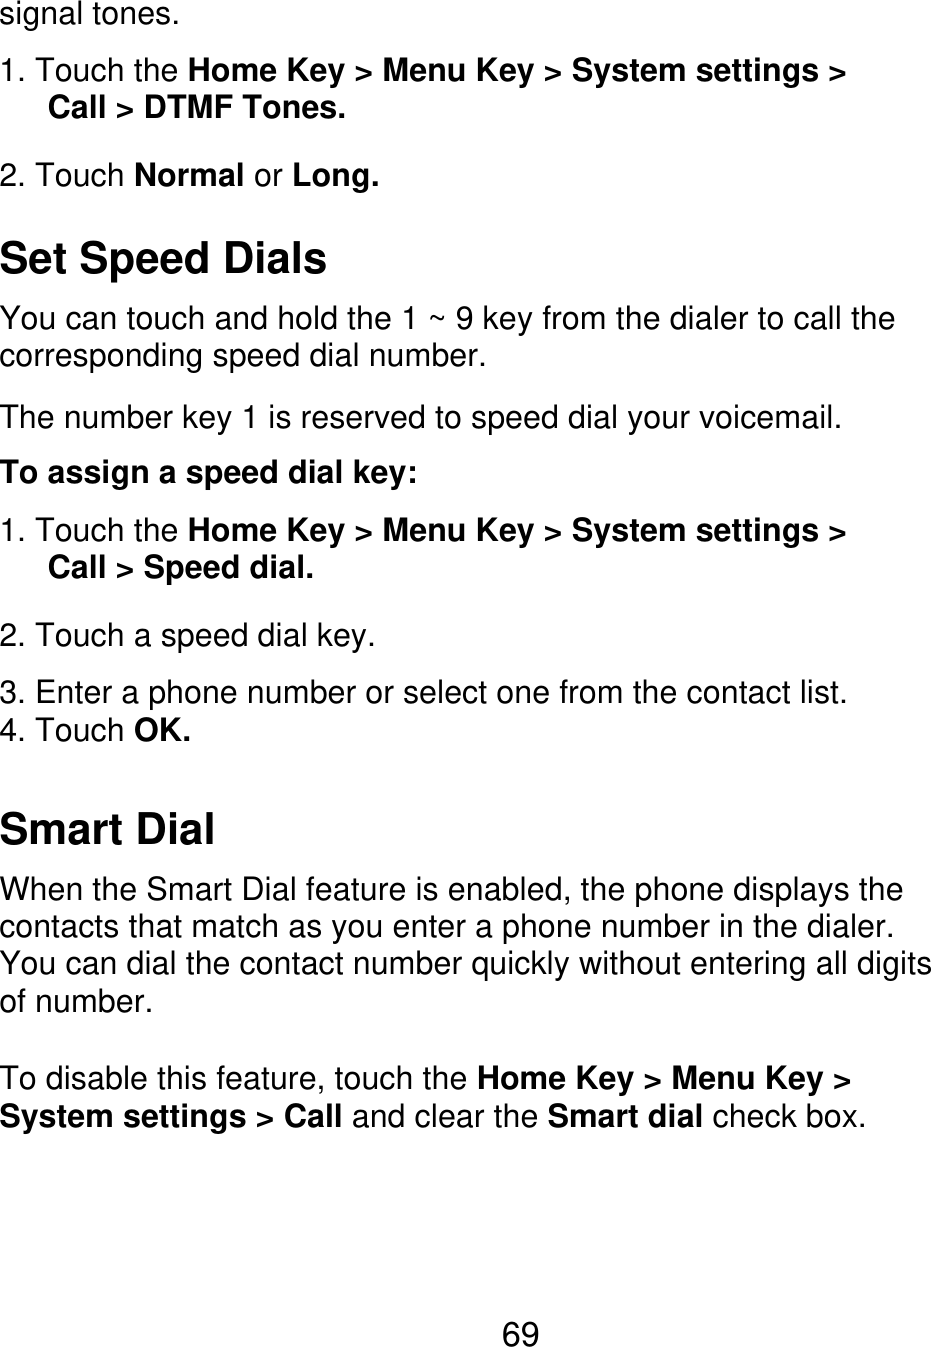 signal tones. 1. Touch the Home Key &gt; Menu Key &gt; System settings &gt;    Call &gt; DTMF Tones. 2. Touch Normal or Long. Set Speed Dials You can touch and hold the 1 ~ 9 key from the dialer to call the corresponding speed dial number. The number key 1 is reserved to speed dial your voicemail. To assign a speed dial key: 1. Touch the Home Key &gt; Menu Key &gt; System settings &gt;    Call &gt; Speed dial. 2. Touch a speed dial key. 3. Enter a phone number or select one from the contact list. 4. Touch OK. Smart Dial When the Smart Dial feature is enabled, the phone displays the contacts that match as you enter a phone number in the dialer. You can dial the contact number quickly without entering all digits of number. To disable this feature, touch the Home Key &gt; Menu Key &gt; System settings &gt; Call and clear the Smart dial check box. 69 